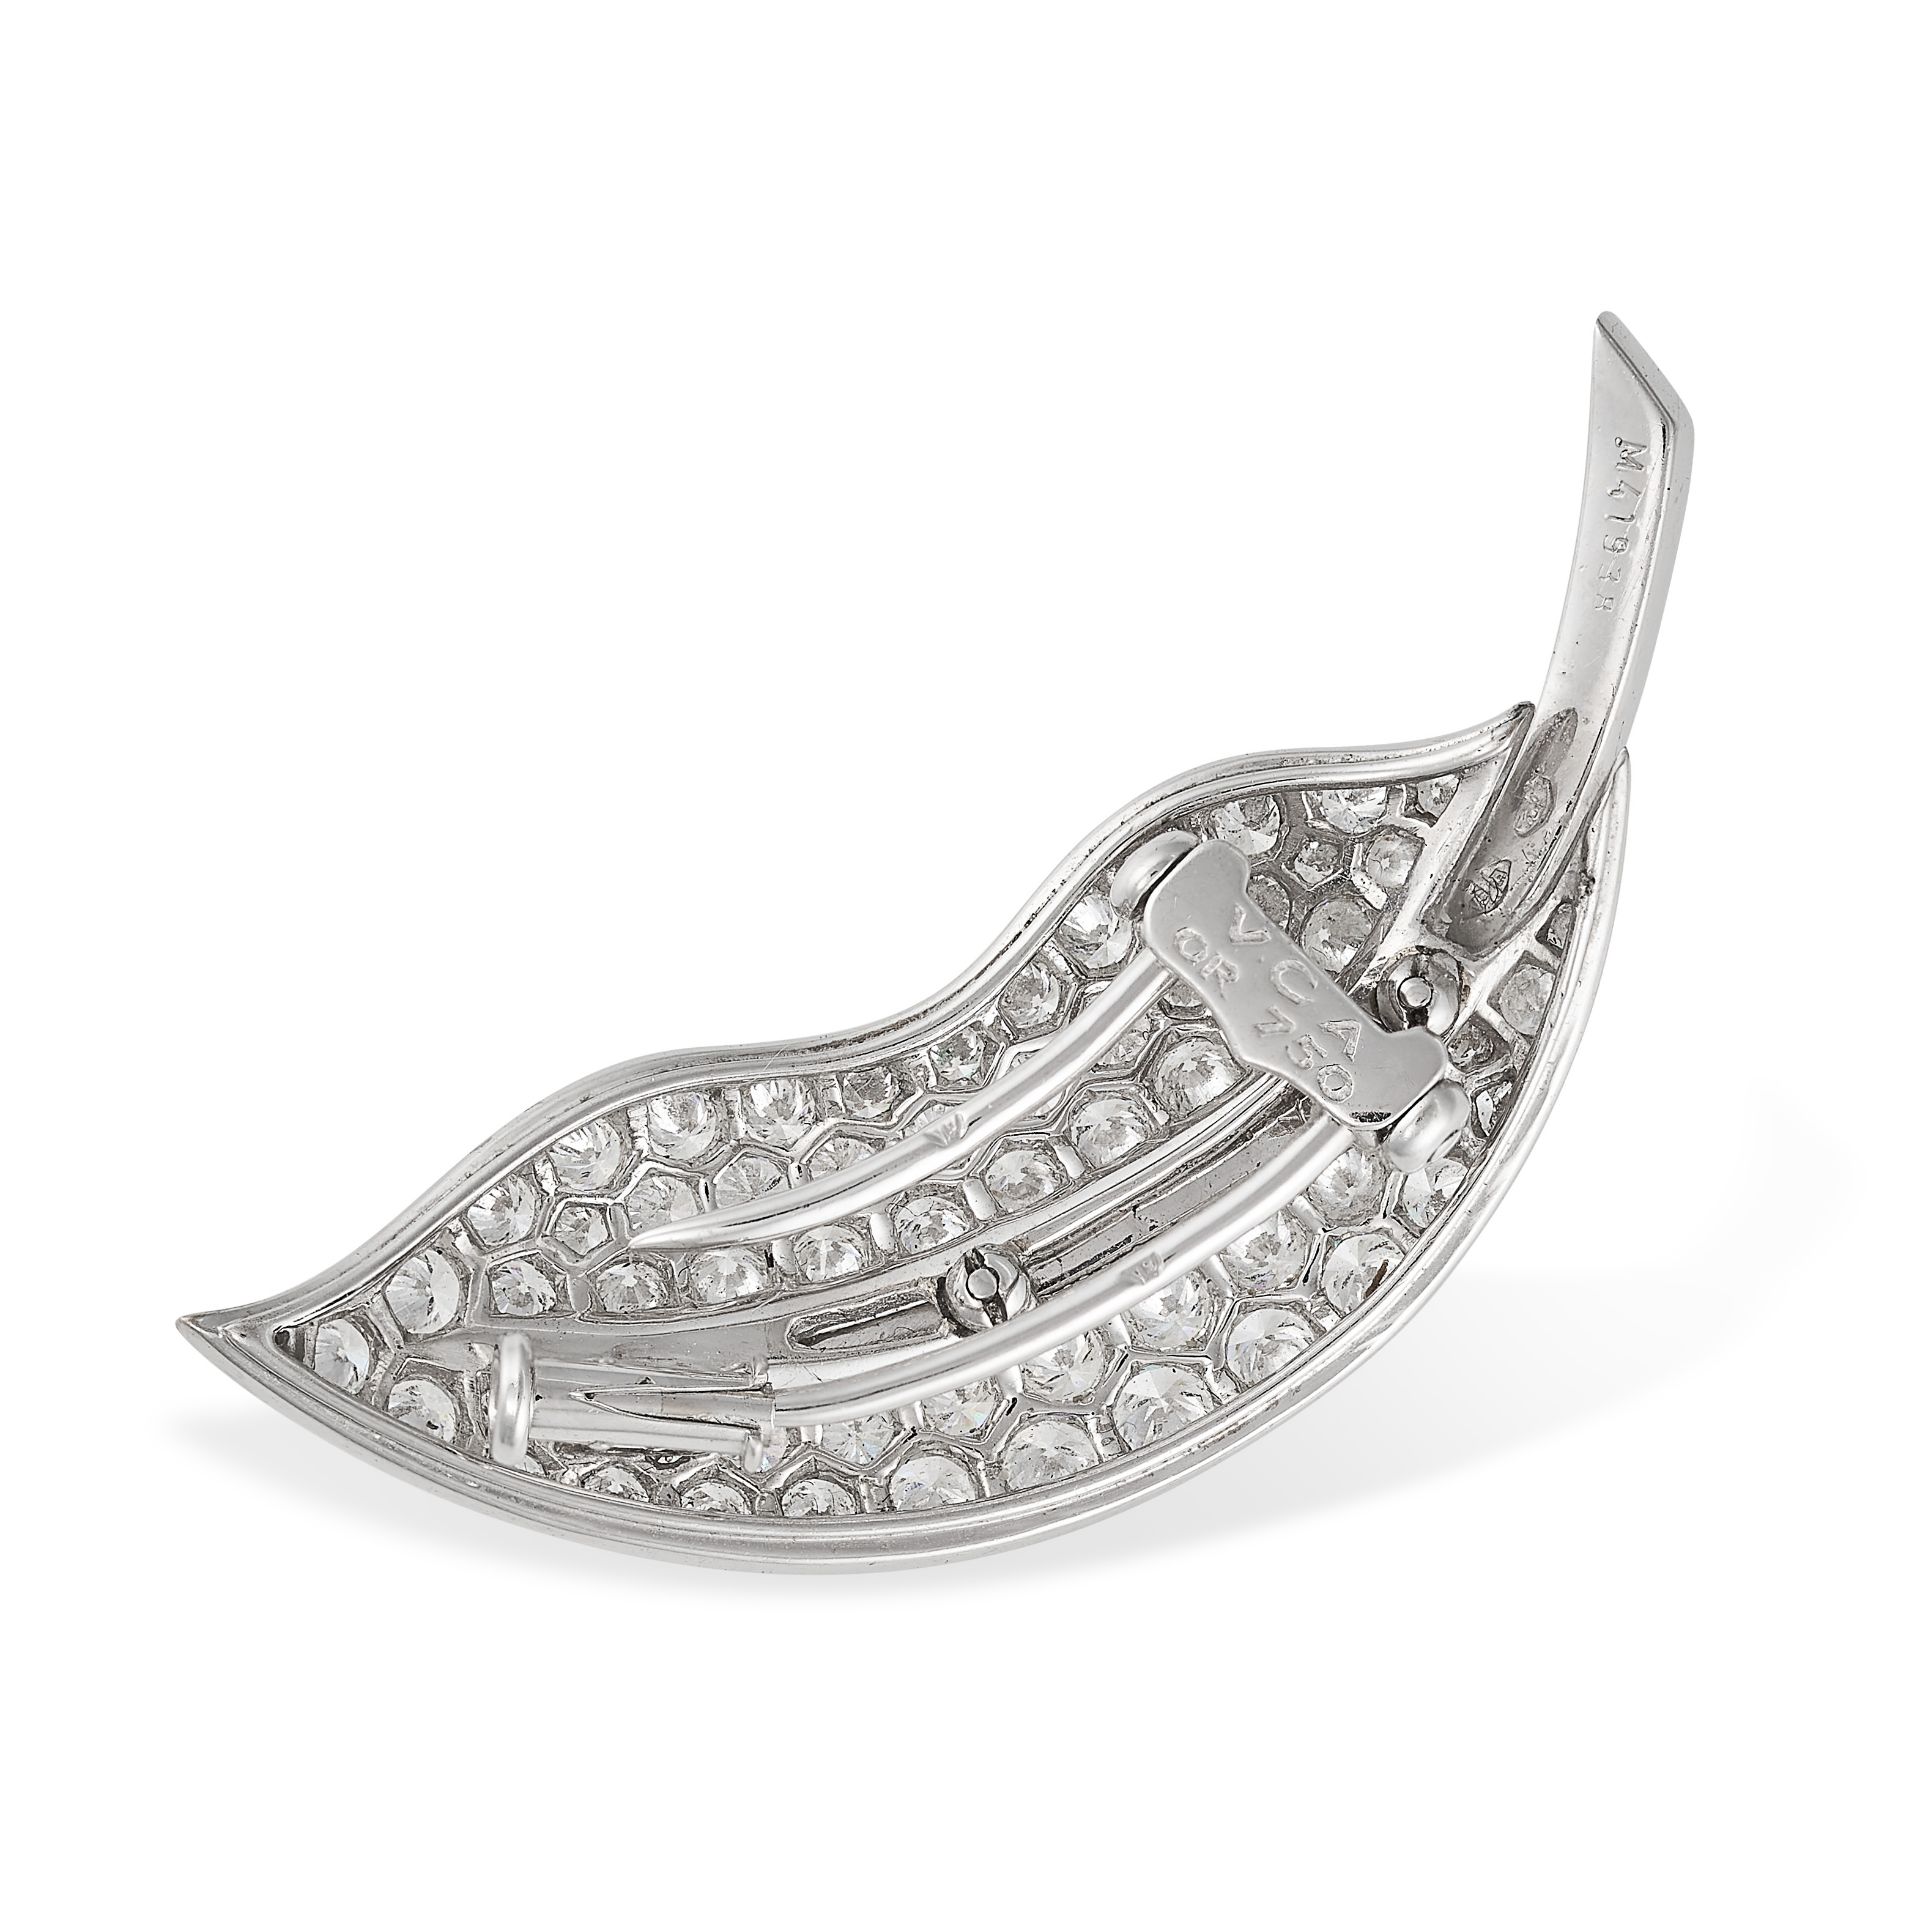 VAN CLEEF AND ARPELS, A VINTAGE FEUILLE LEAF BROOCH, 1990S in 18ct white gold, designed as a - Image 2 of 2